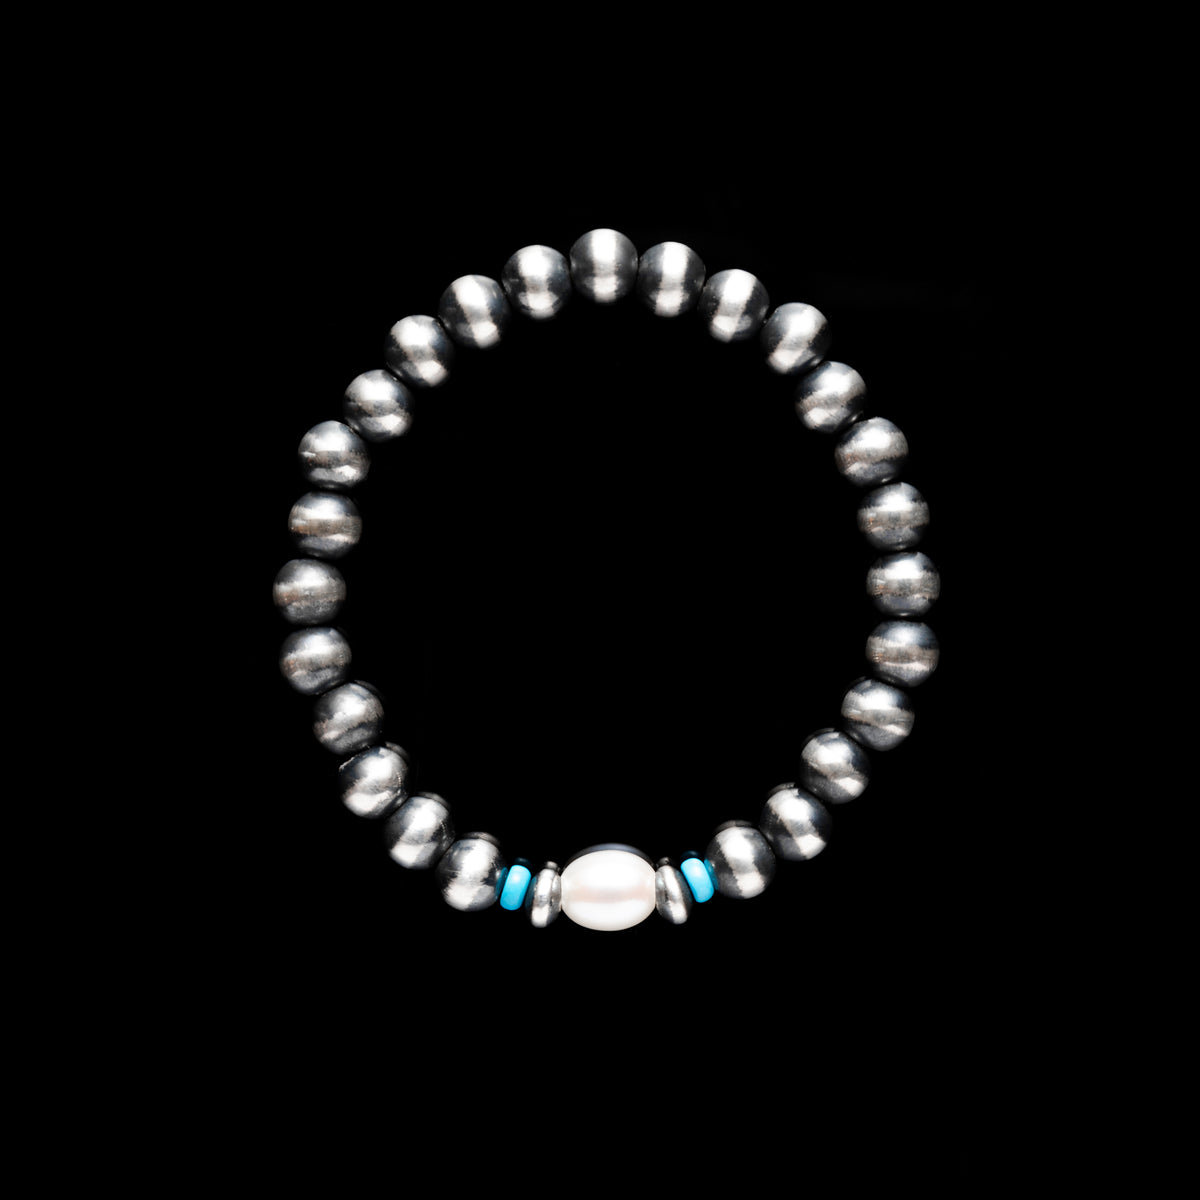 7mm Santa Fe Pearl Stretch Bracelet with Turquoise Accents